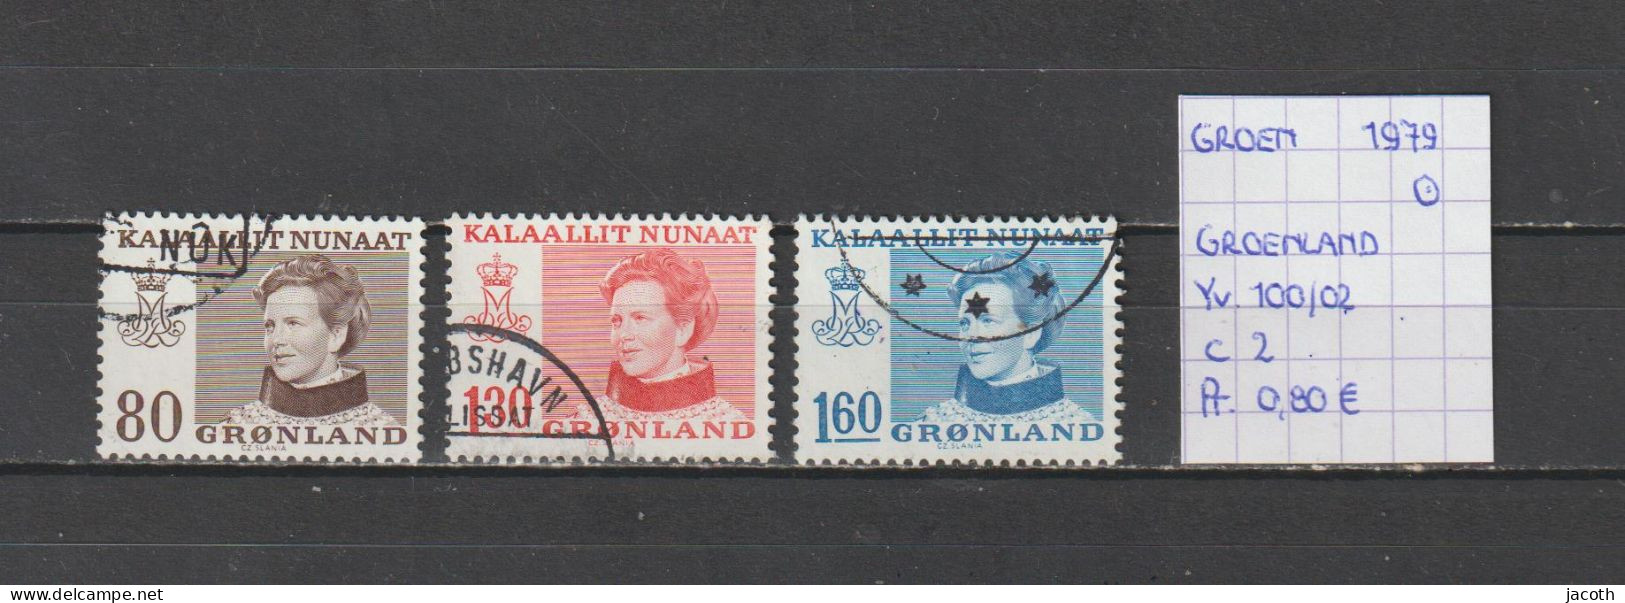 (TJ) Groenland 1979 - YT 100/02 (gest./obl./used) - Used Stamps